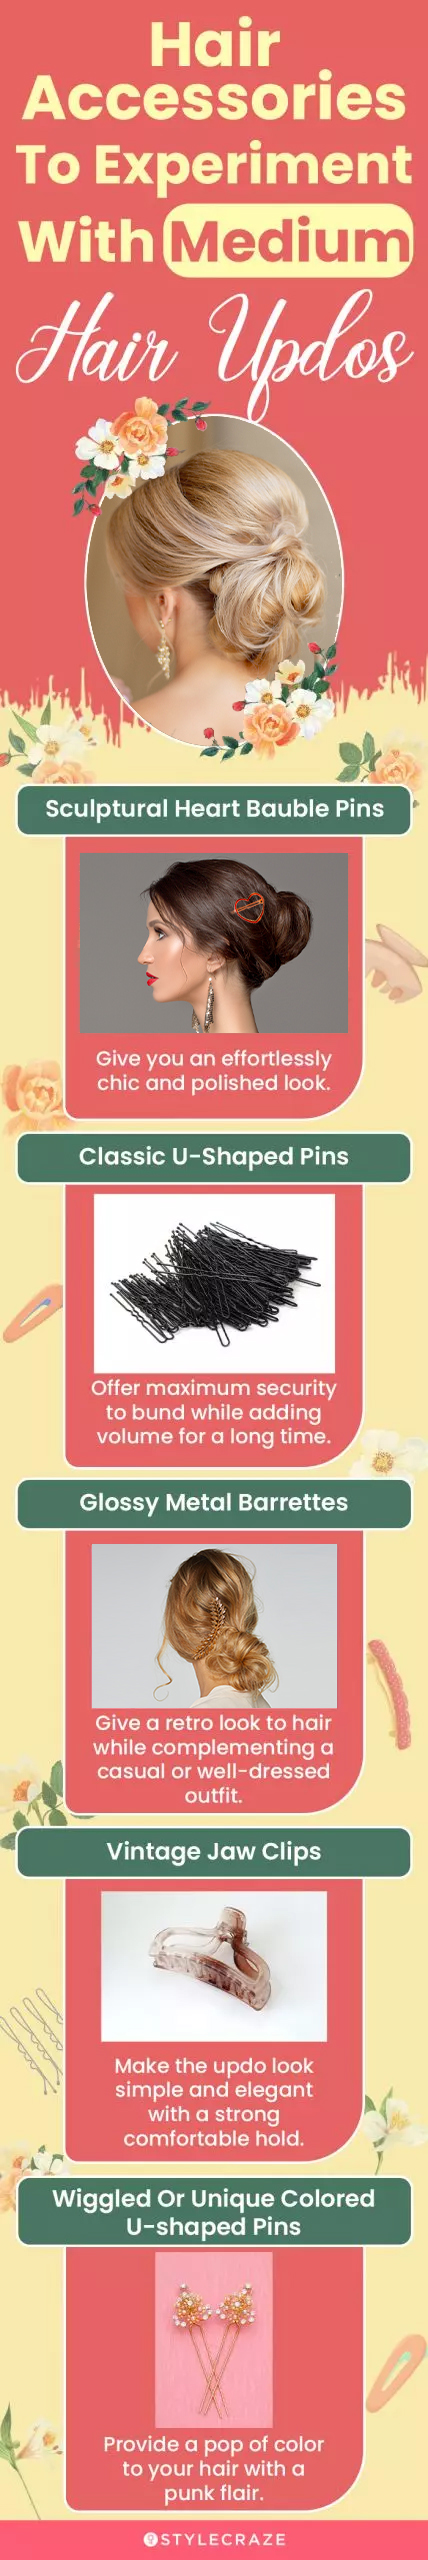 hair accessories to experiment with medium hair updos (infographic)